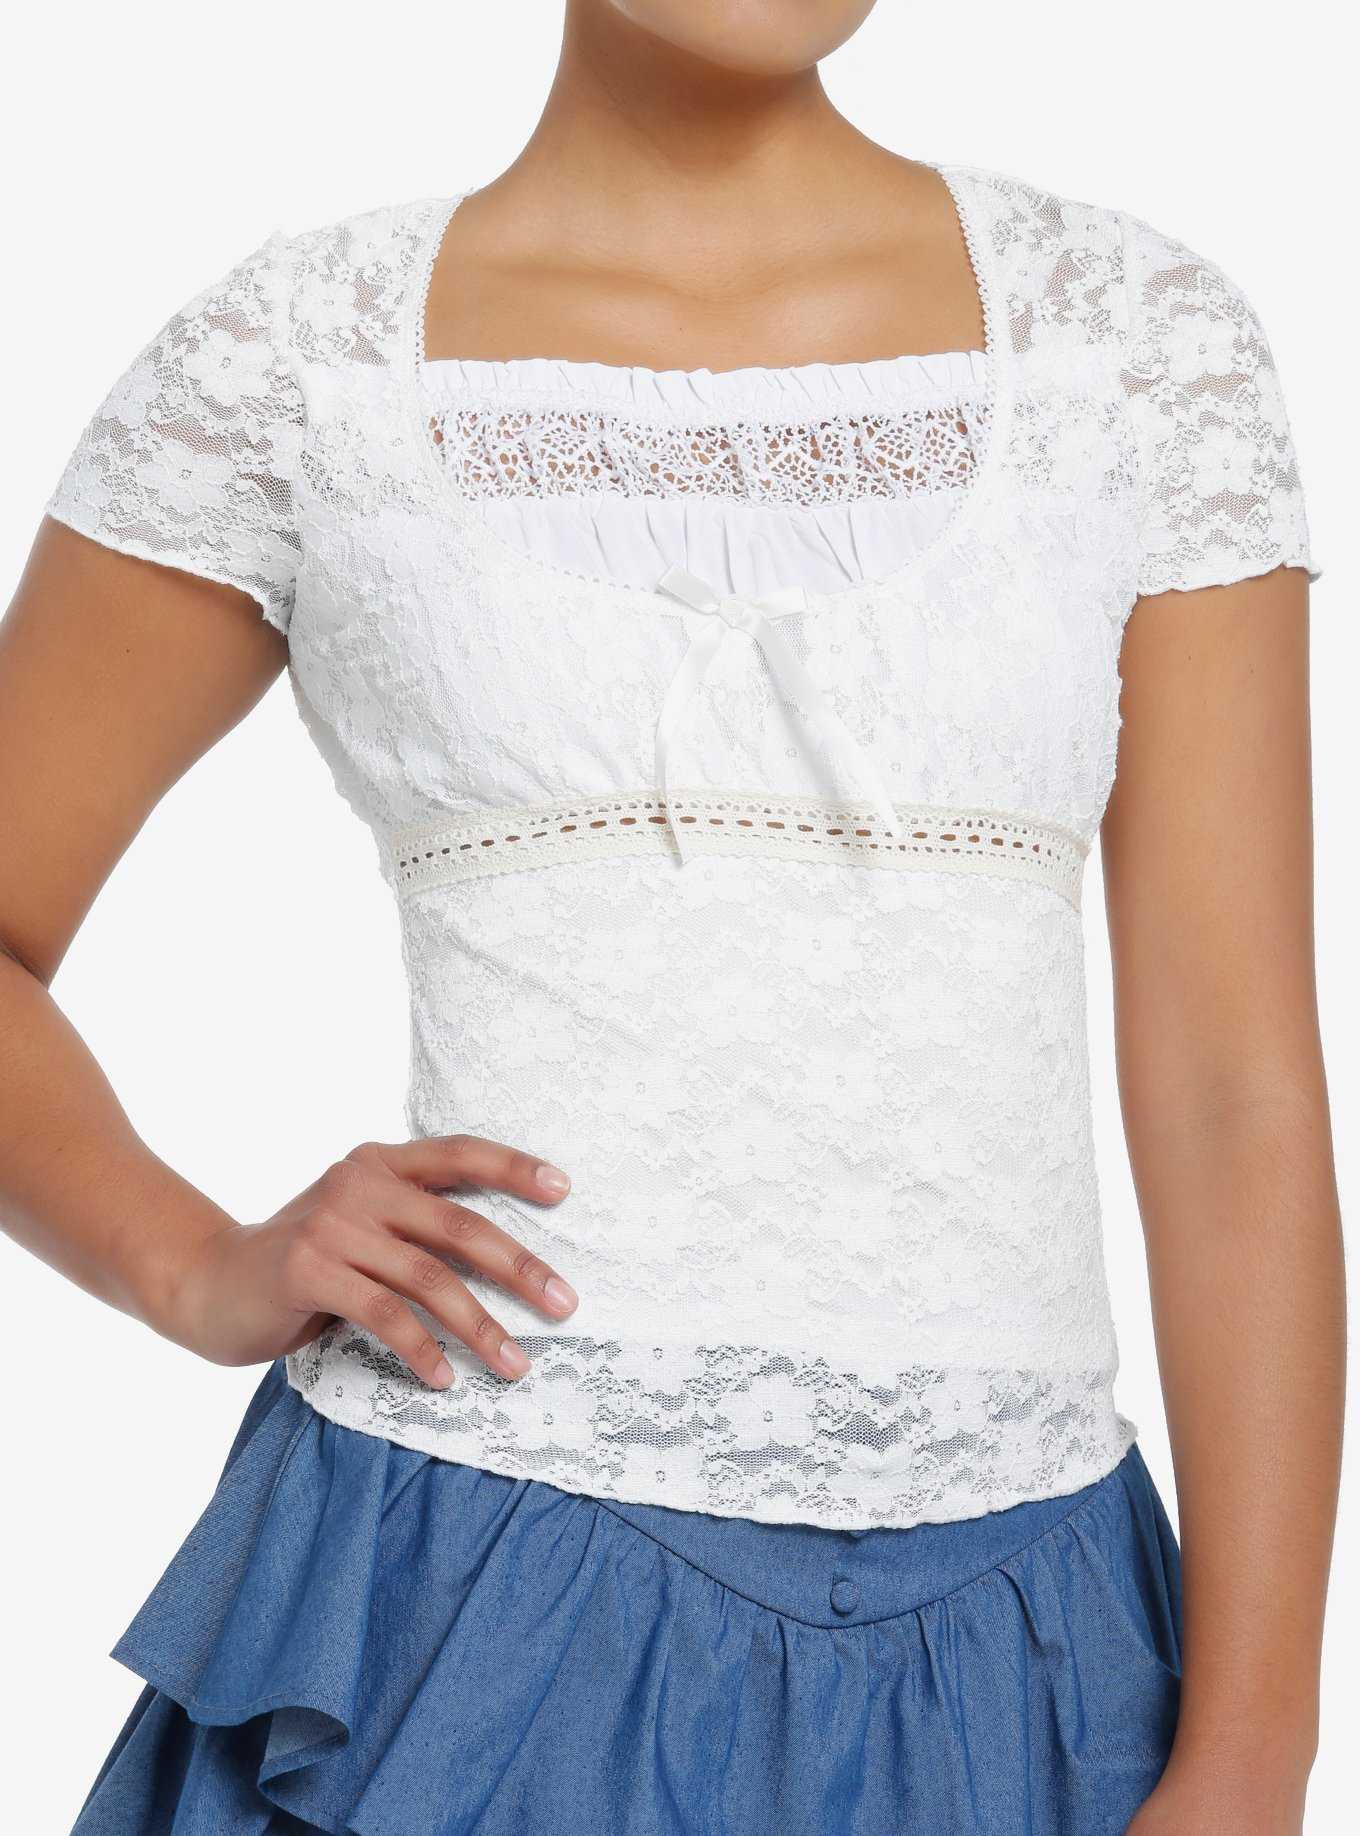 Sweet Society White Lace Girls Babydoll Top, , hi-res